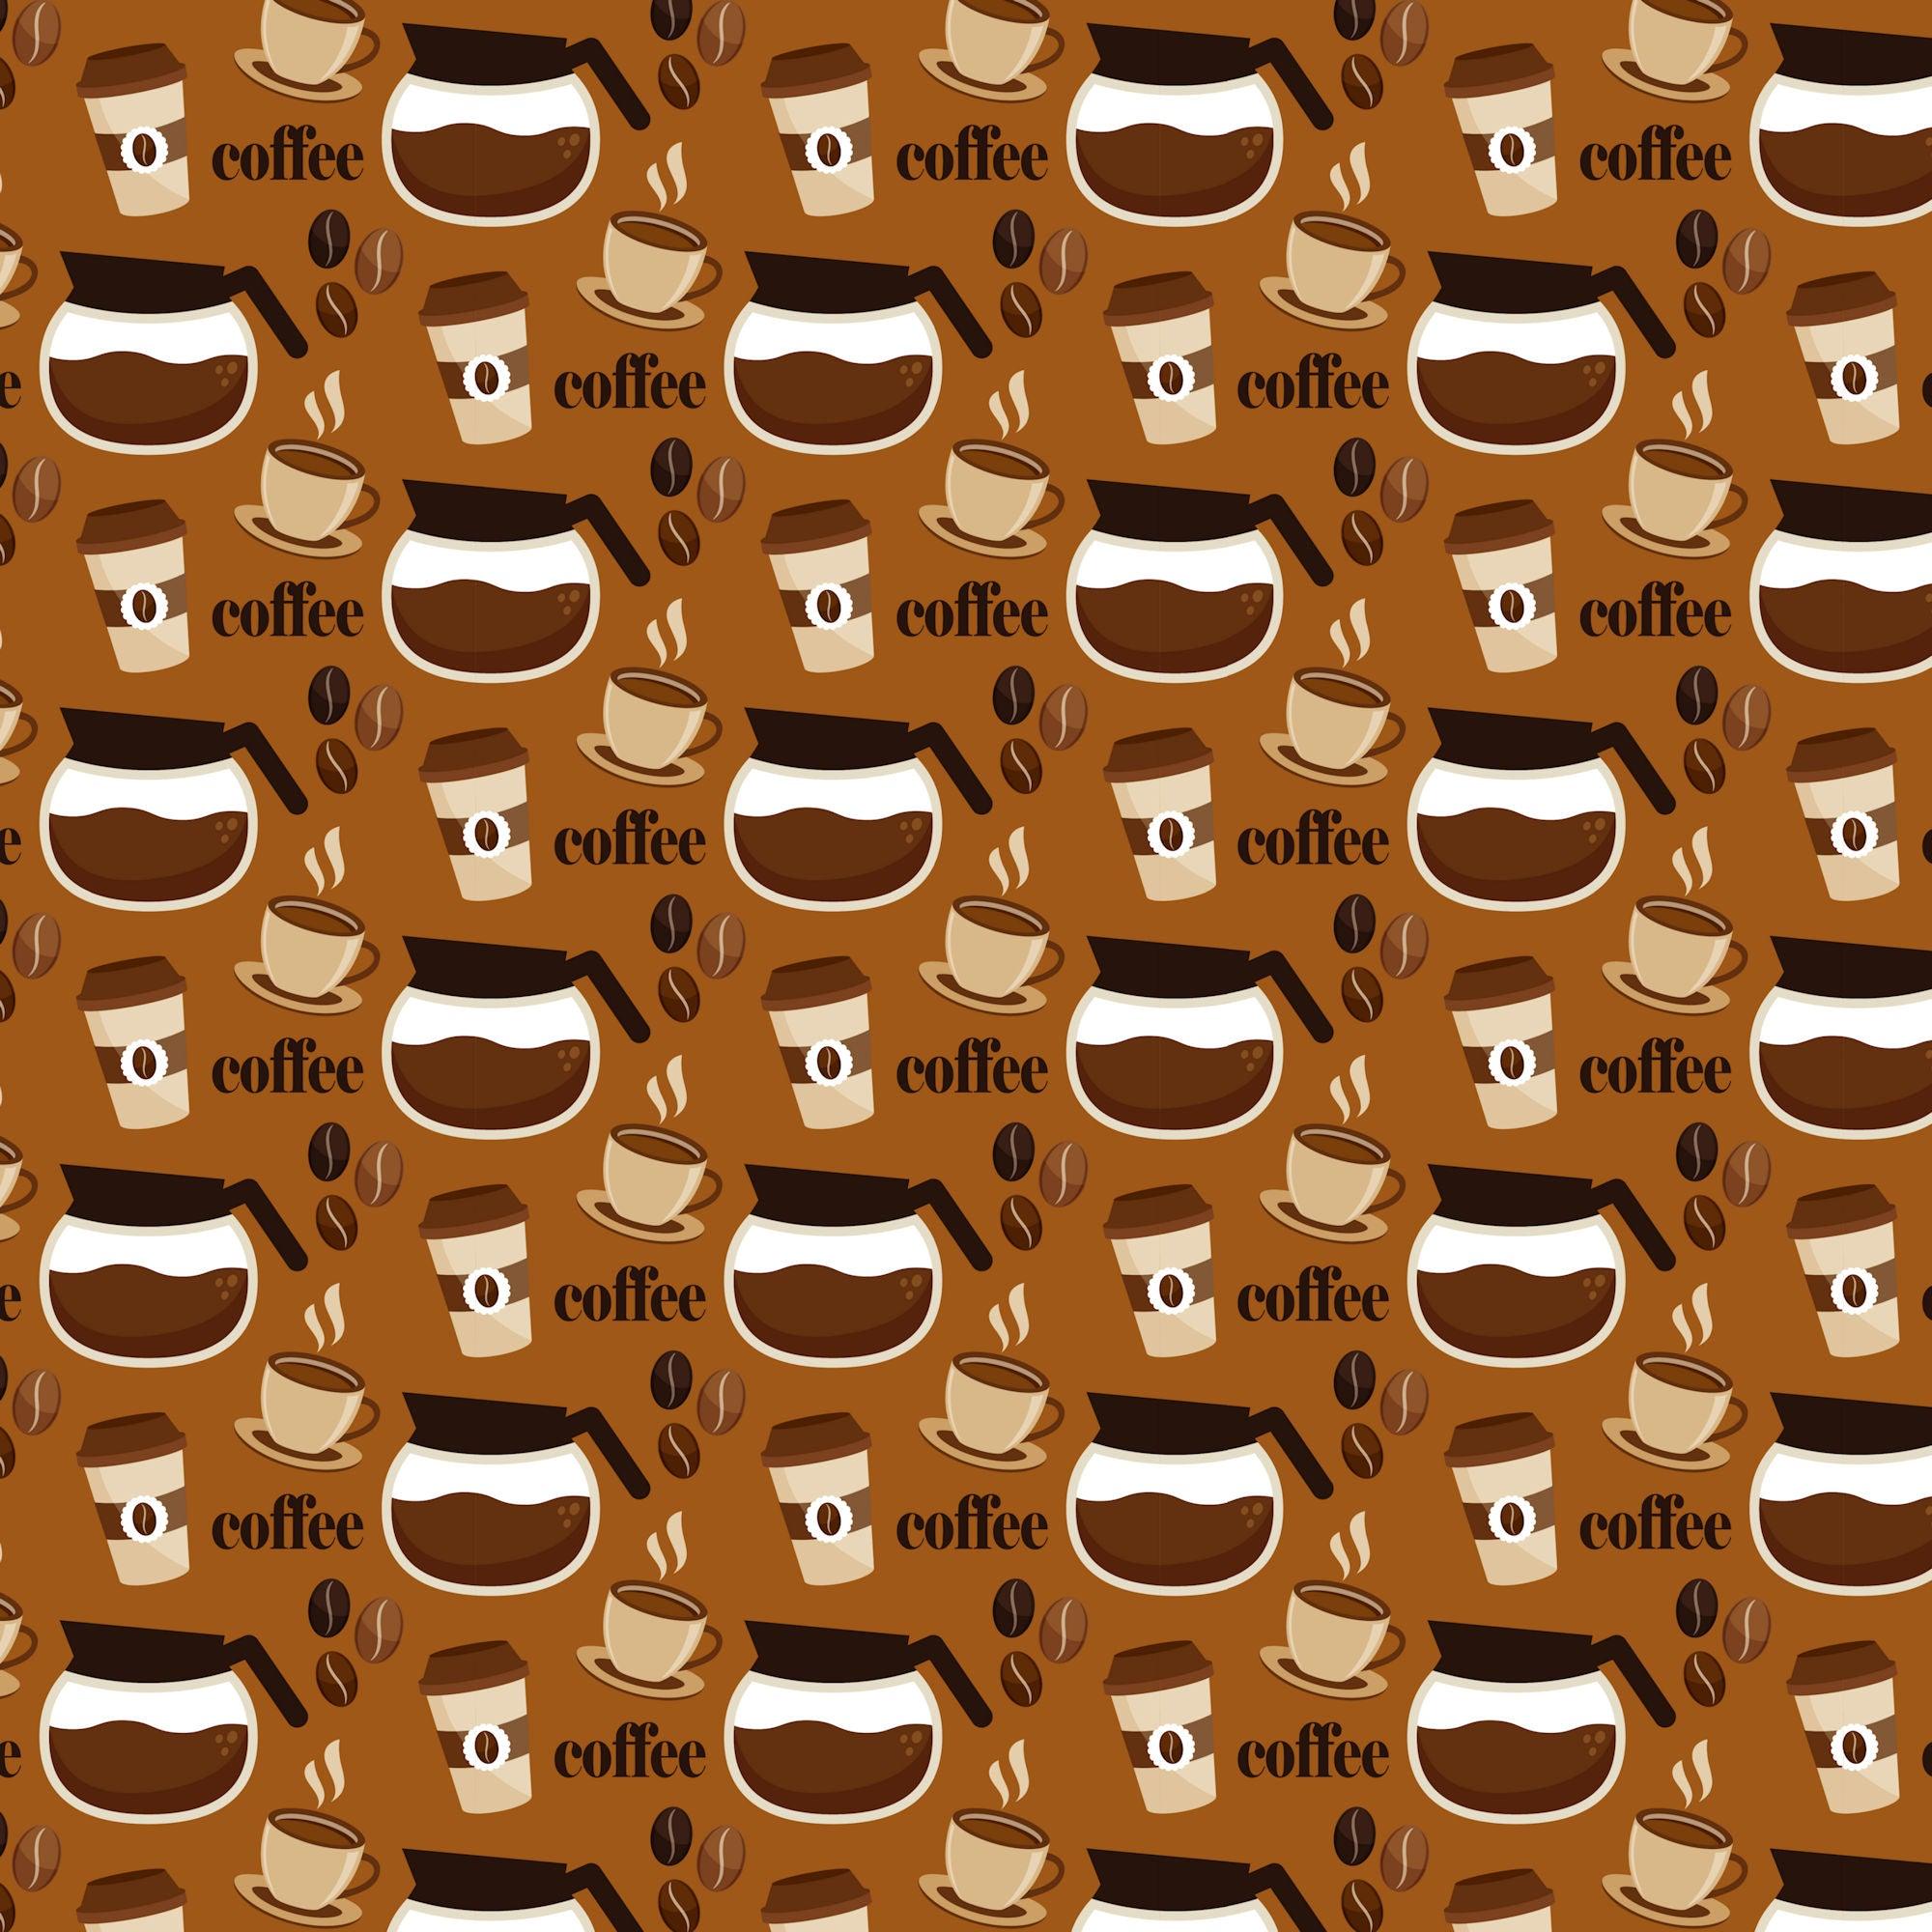 Coffee Lover Collection Good Morning 12 x 12 Double-Sided Scrapbook Paper by SSC Designs - Scrapbook Supply Companies